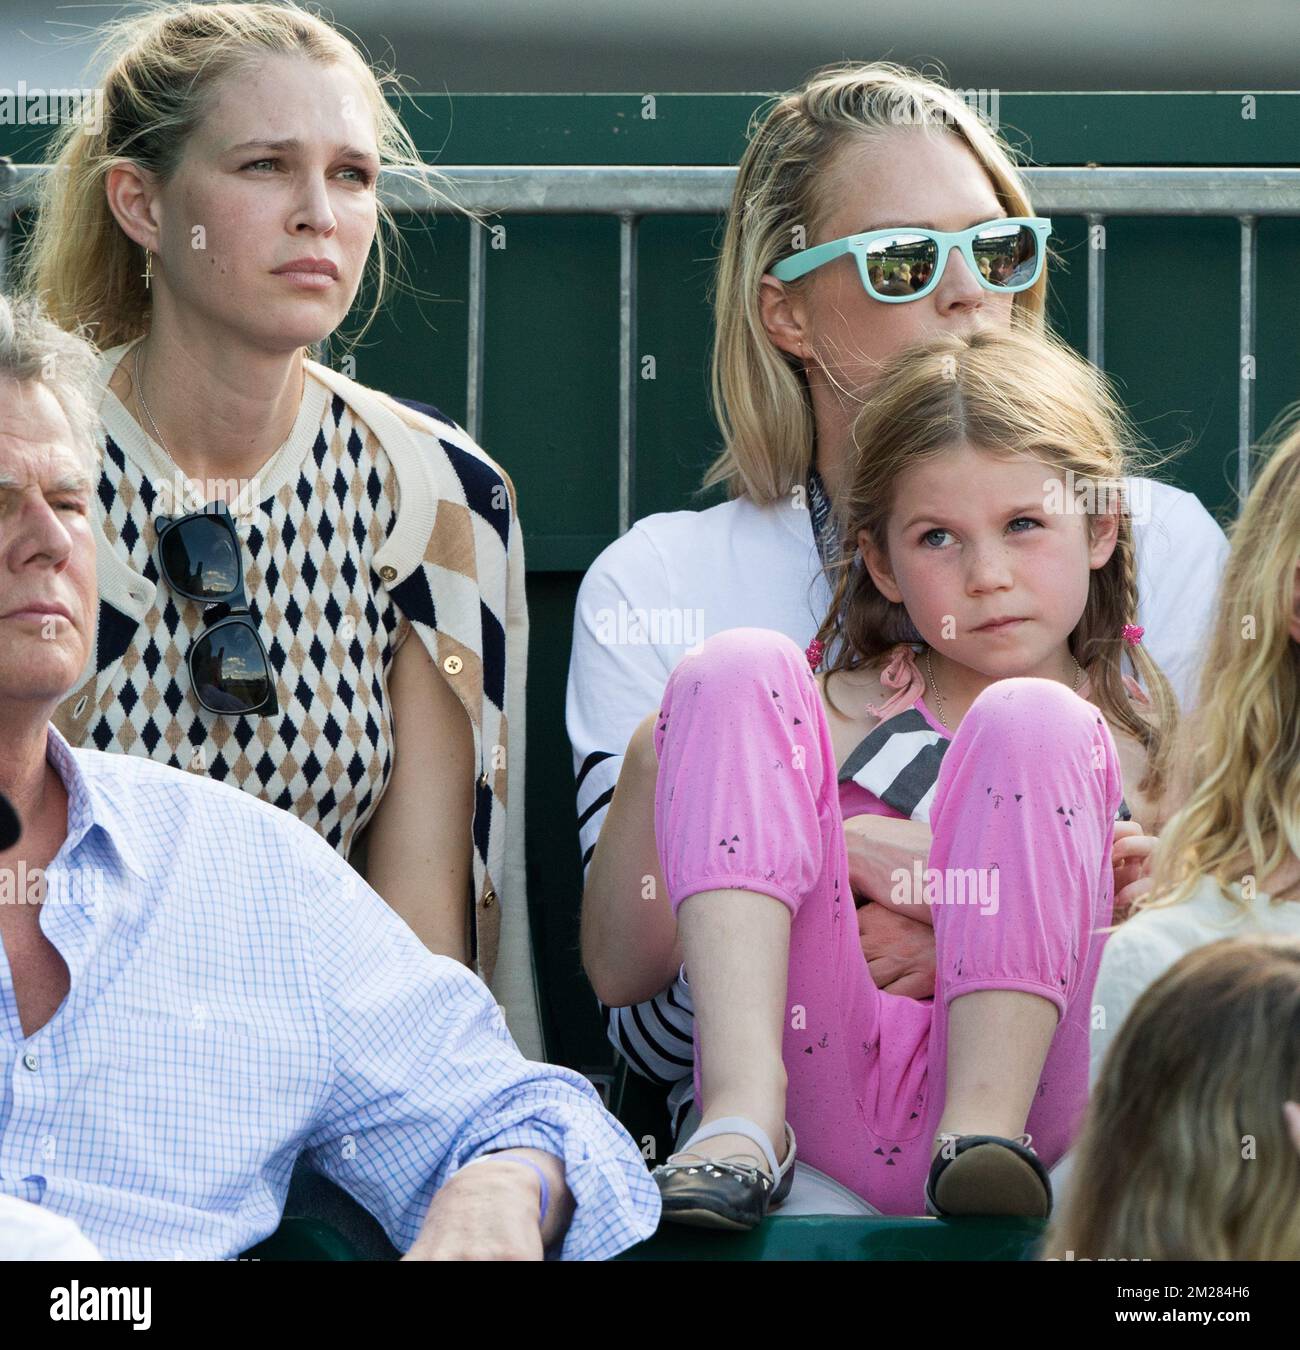 German Player Tommy Haas's daughter Valentina (R) and his wife Sara Foster (L) pictured during a first round game of gentlemens' singles between German Tommy Haas (ATP 254) and Belgian Ruben Bemelmans (ATP 124) at Wimbledon grand slam tennis tournament at the All England Tennis Club, in southwest London, Britain, Monday 03 July 2017. BELGA PHOTO BENOIT DOPPAGNE Stock Photo